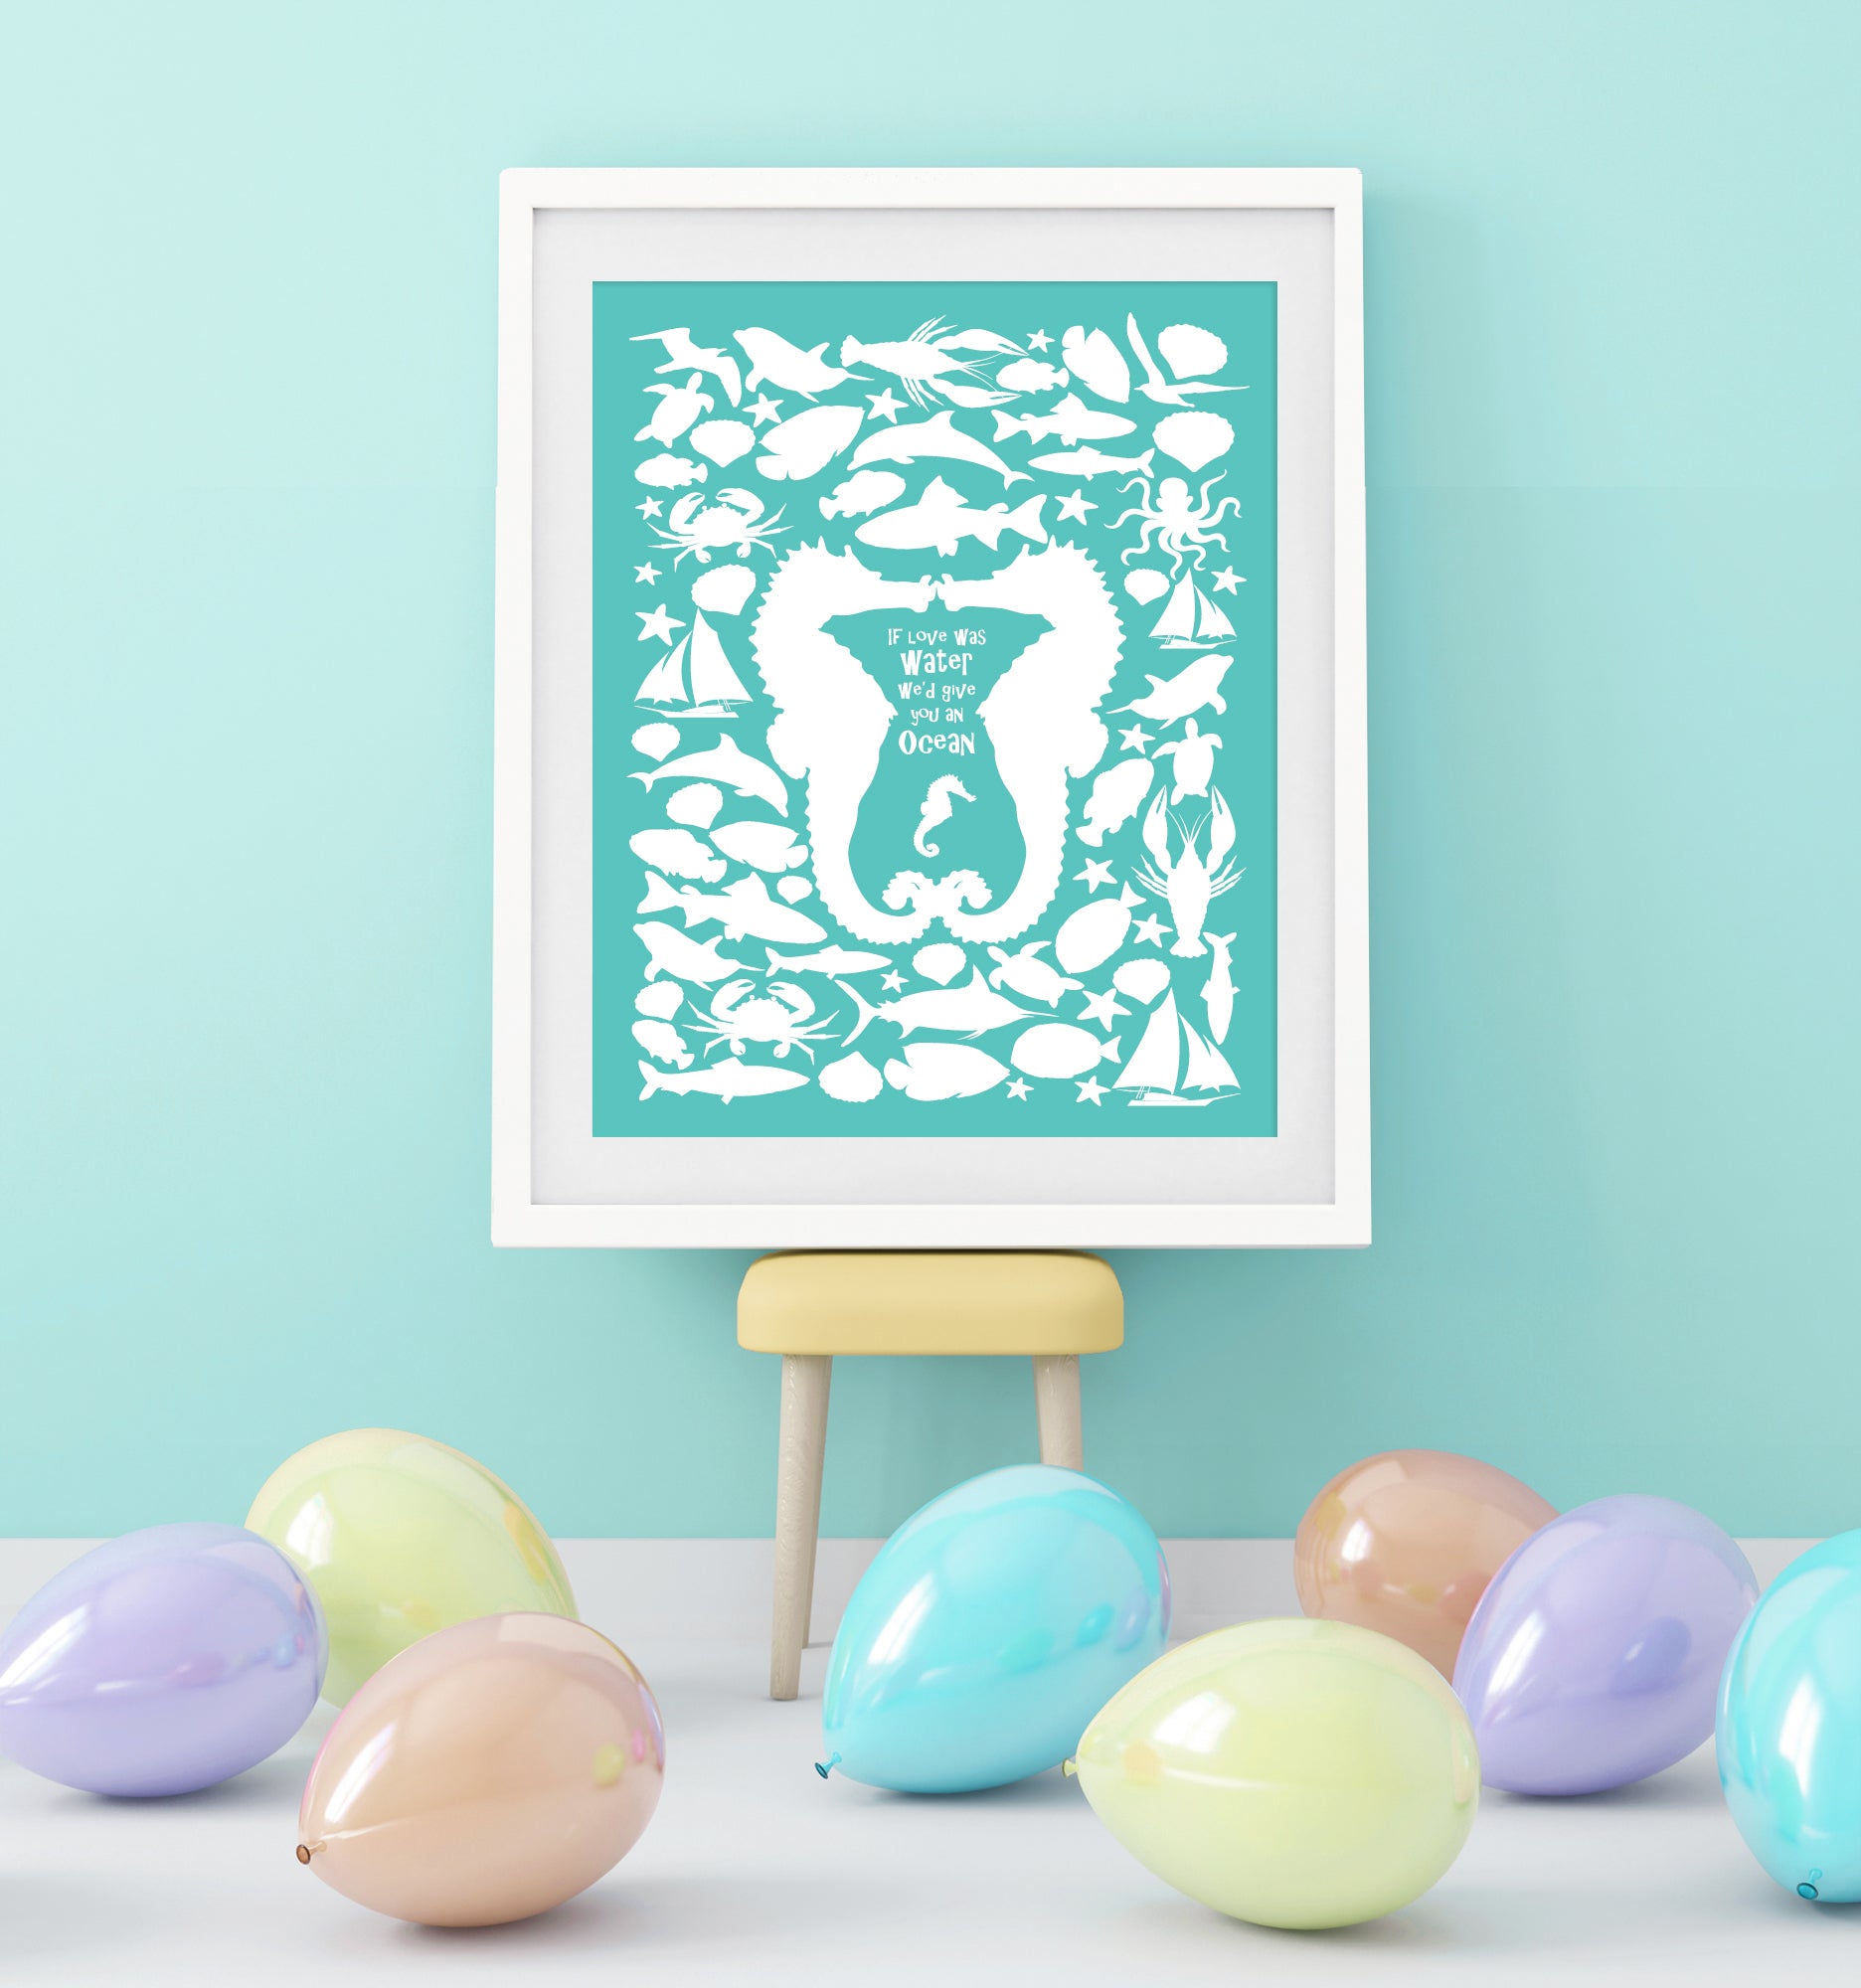 two pretty seahorses and a little baby seahorse plus scattering of sea creatures and boats gorgeous signature guest book poster in a frame at a party